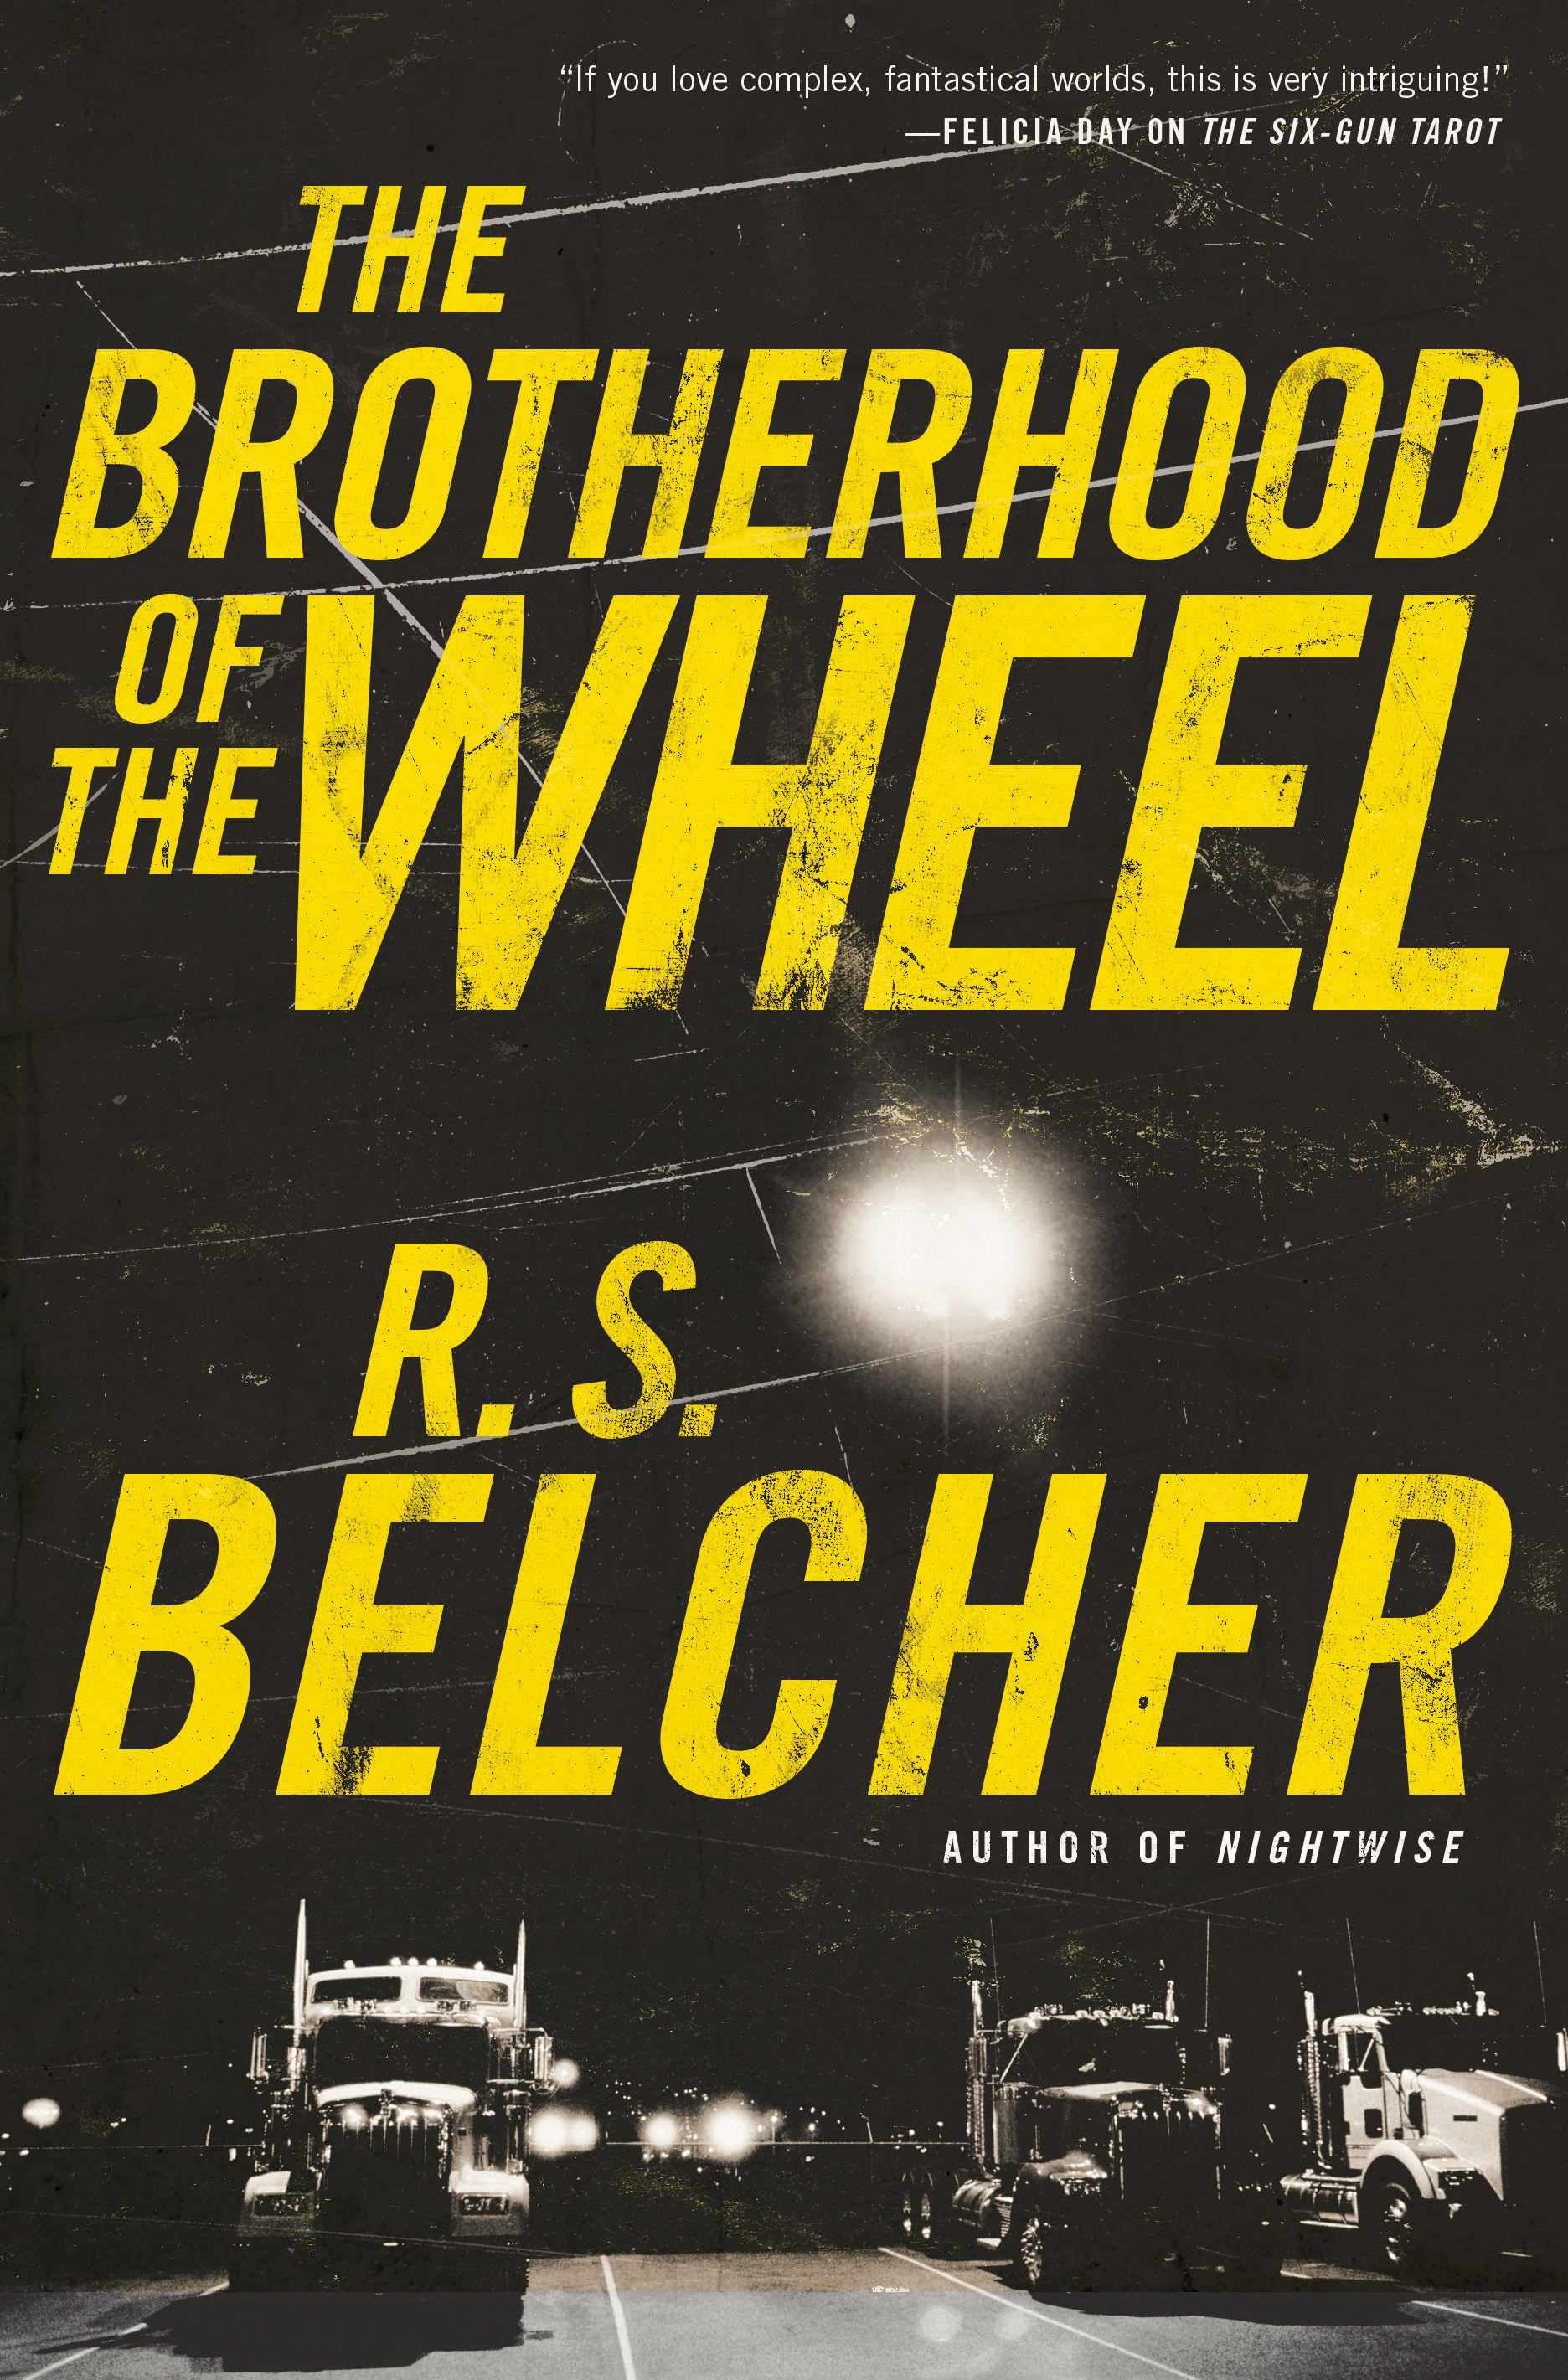 The Brotherhood of the Wheel : A Novel by R. S. Belcher